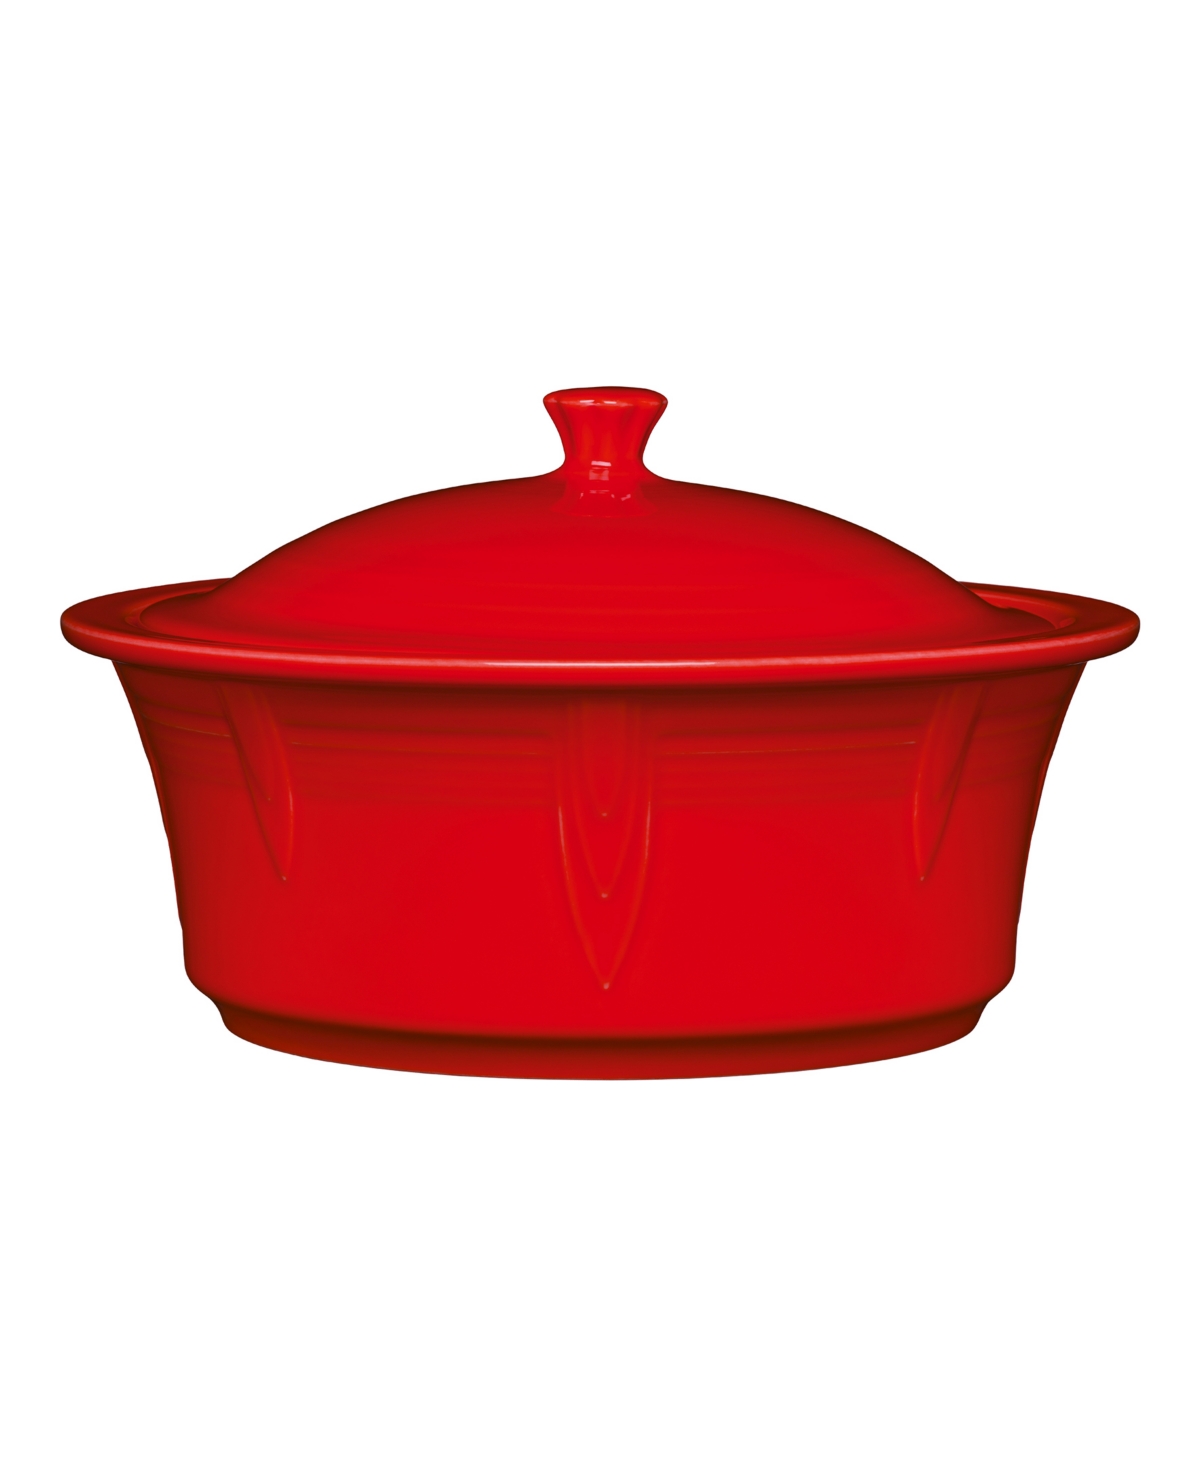 Fiesta Large Covered Casserole 90 Oz. In Scarlet